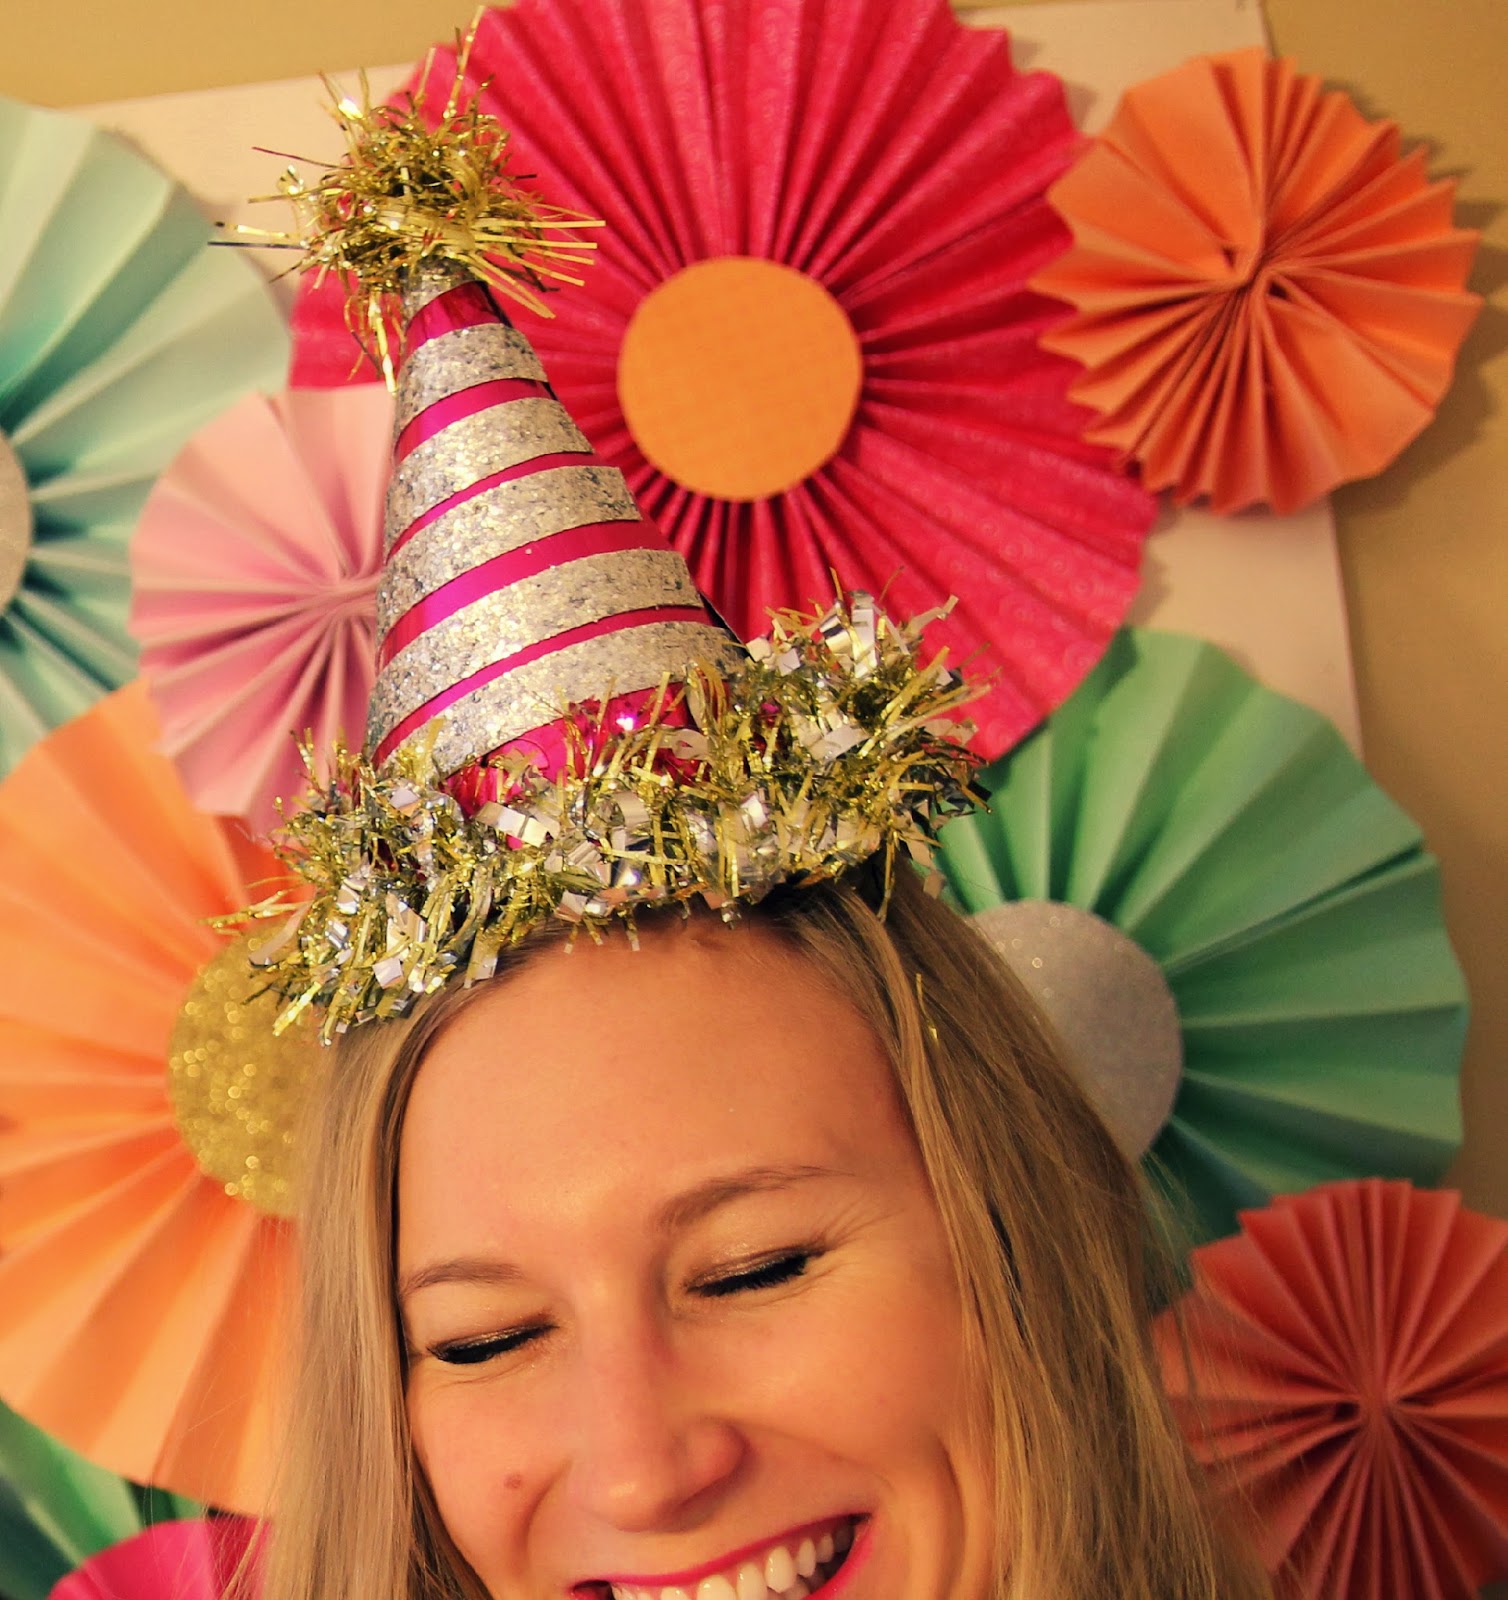 This, too: PEICD (PROJECTS EVEN I CAN DO): HOW TO MAKE A GLITZY PARTY HAT